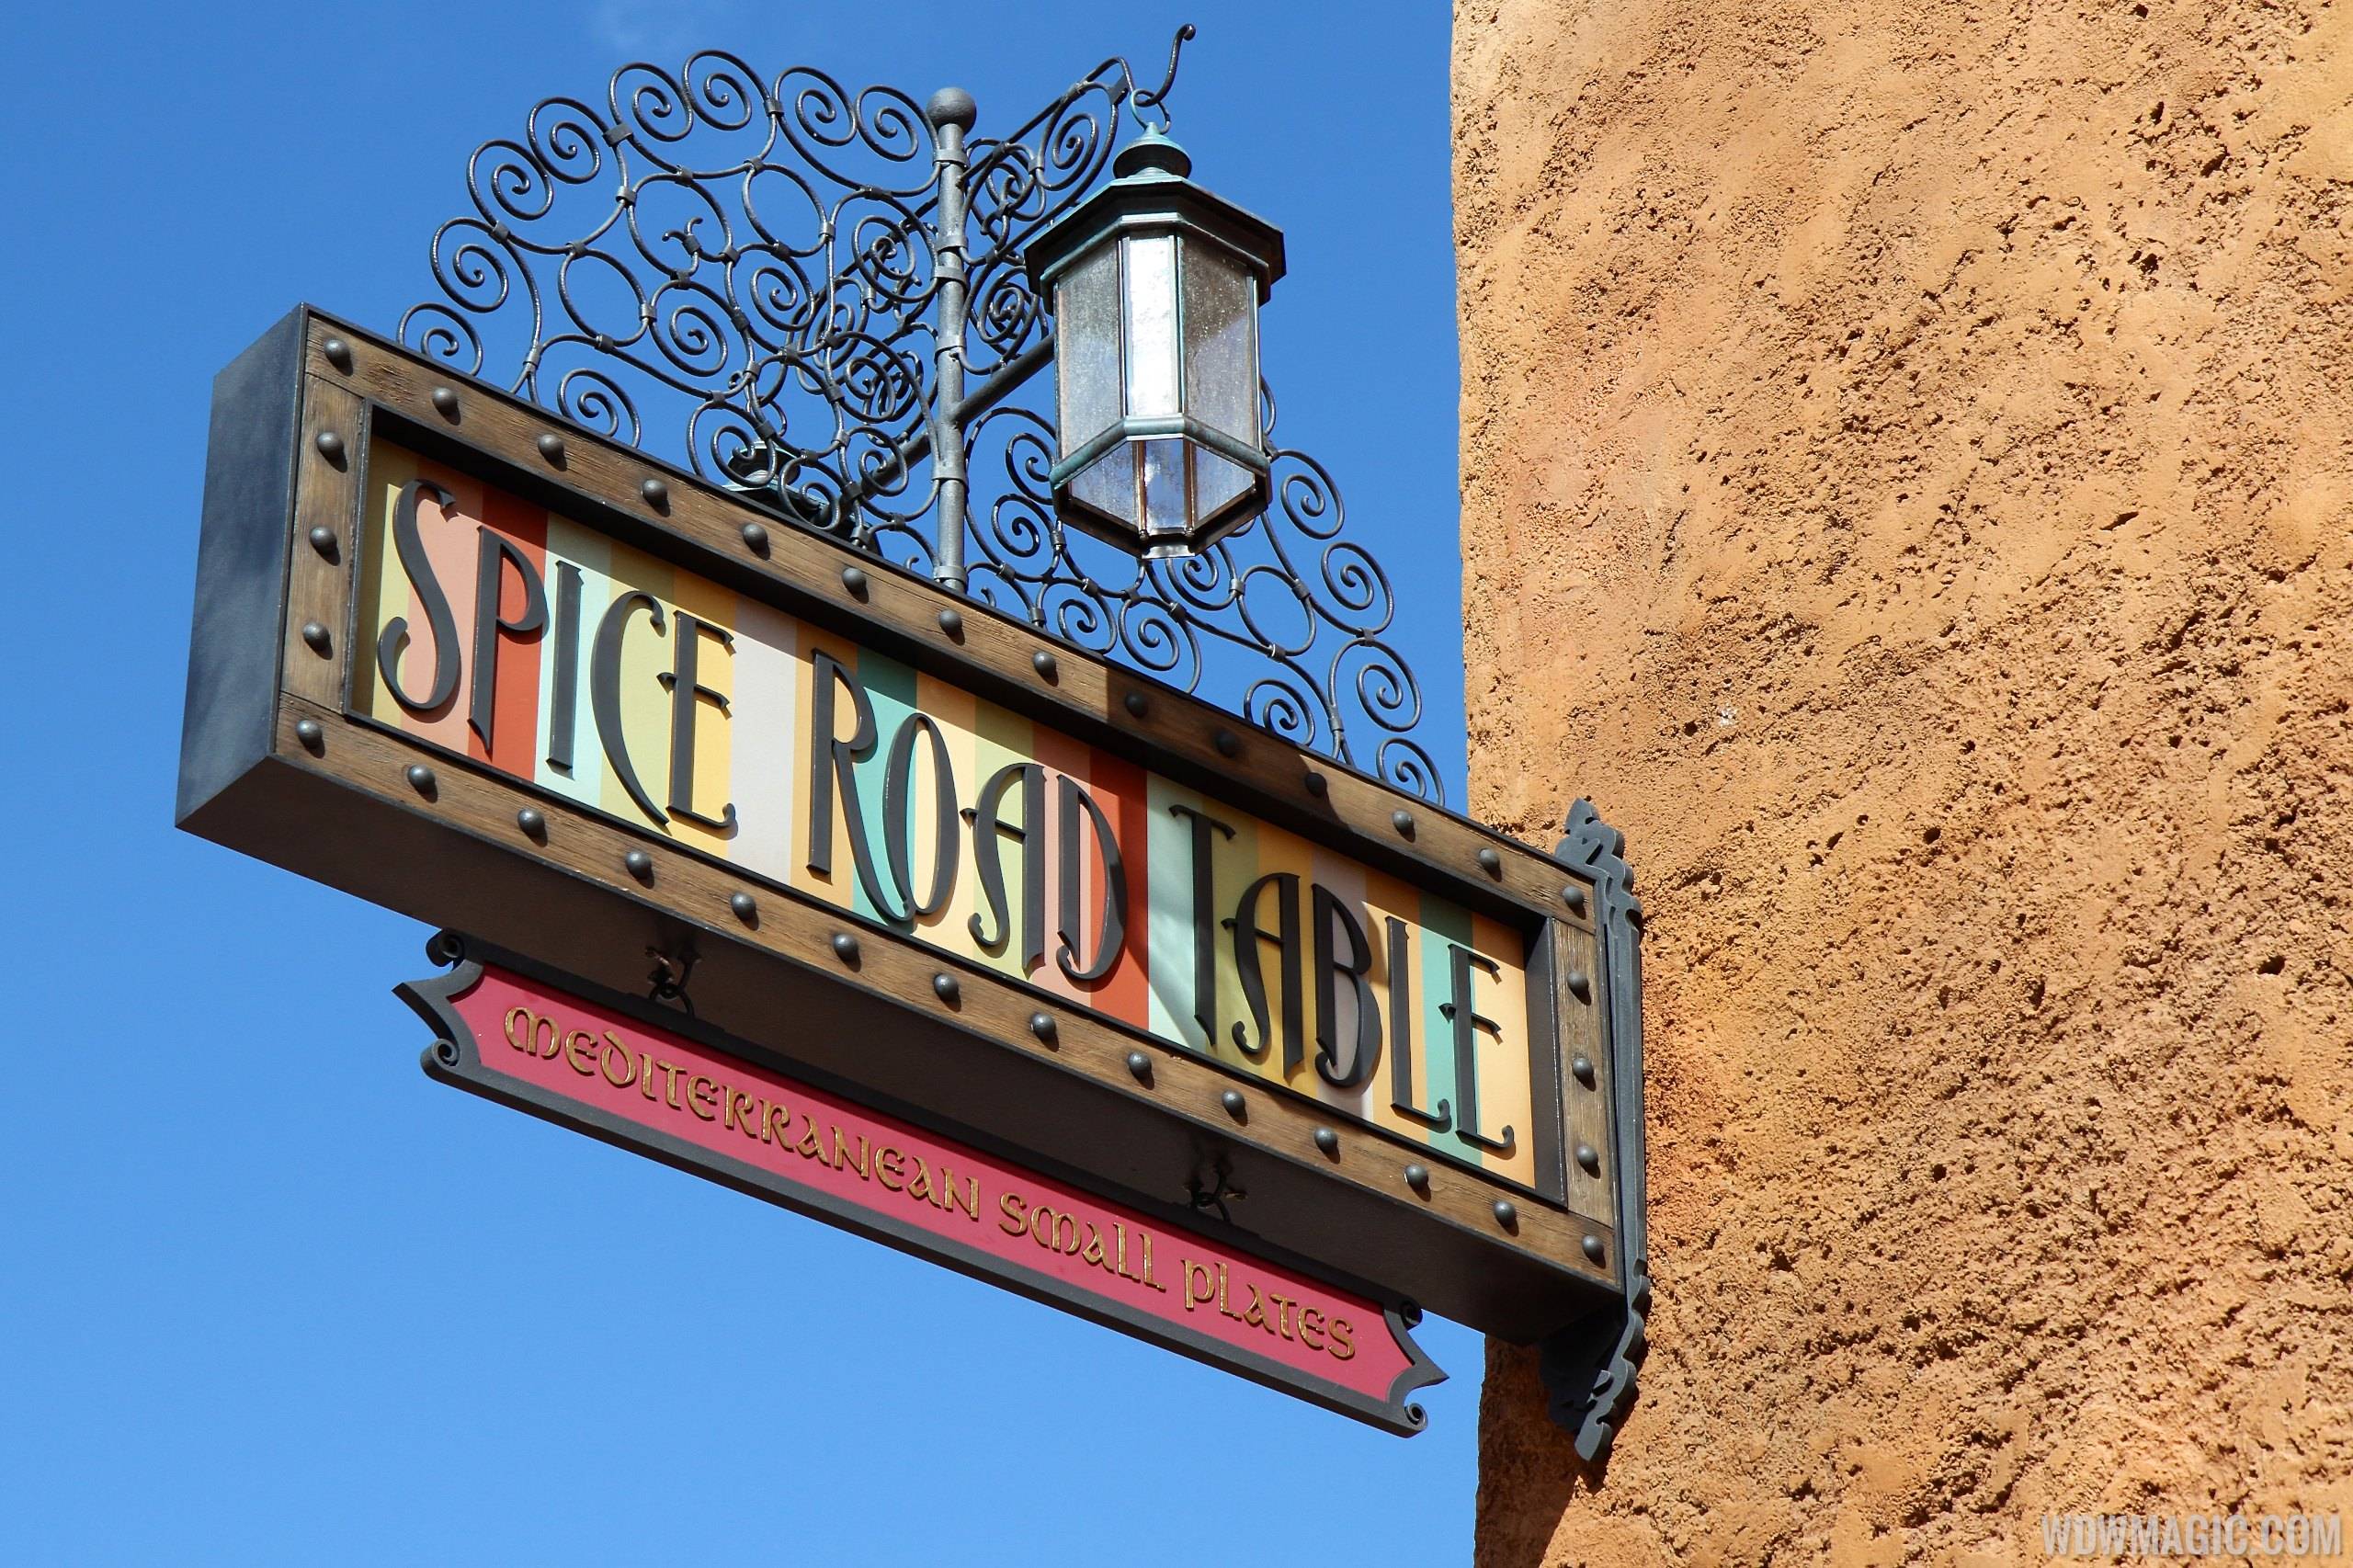 REVIEW - Spice Road Table at Epcot's Morocco Pavilion